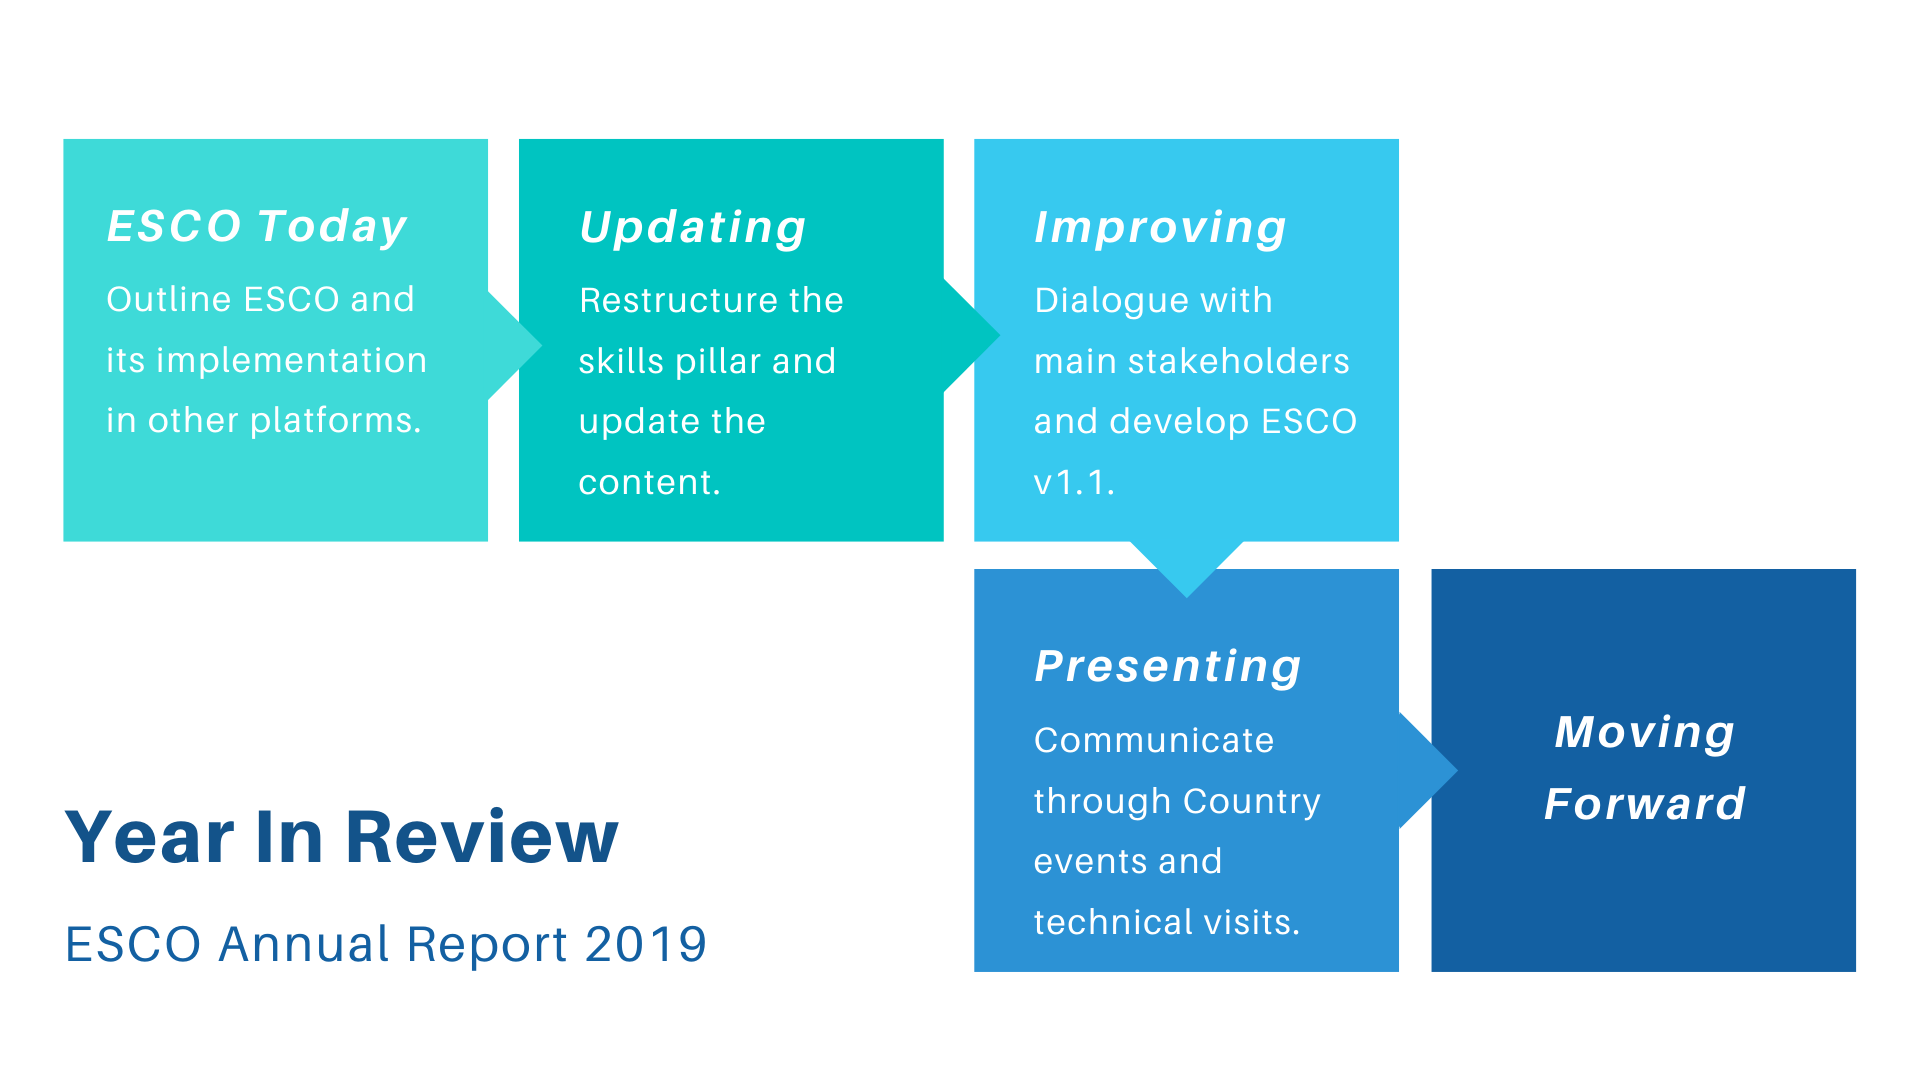 Image: ESCO Annual Report 2019 Online - Changes and Updates Summarized